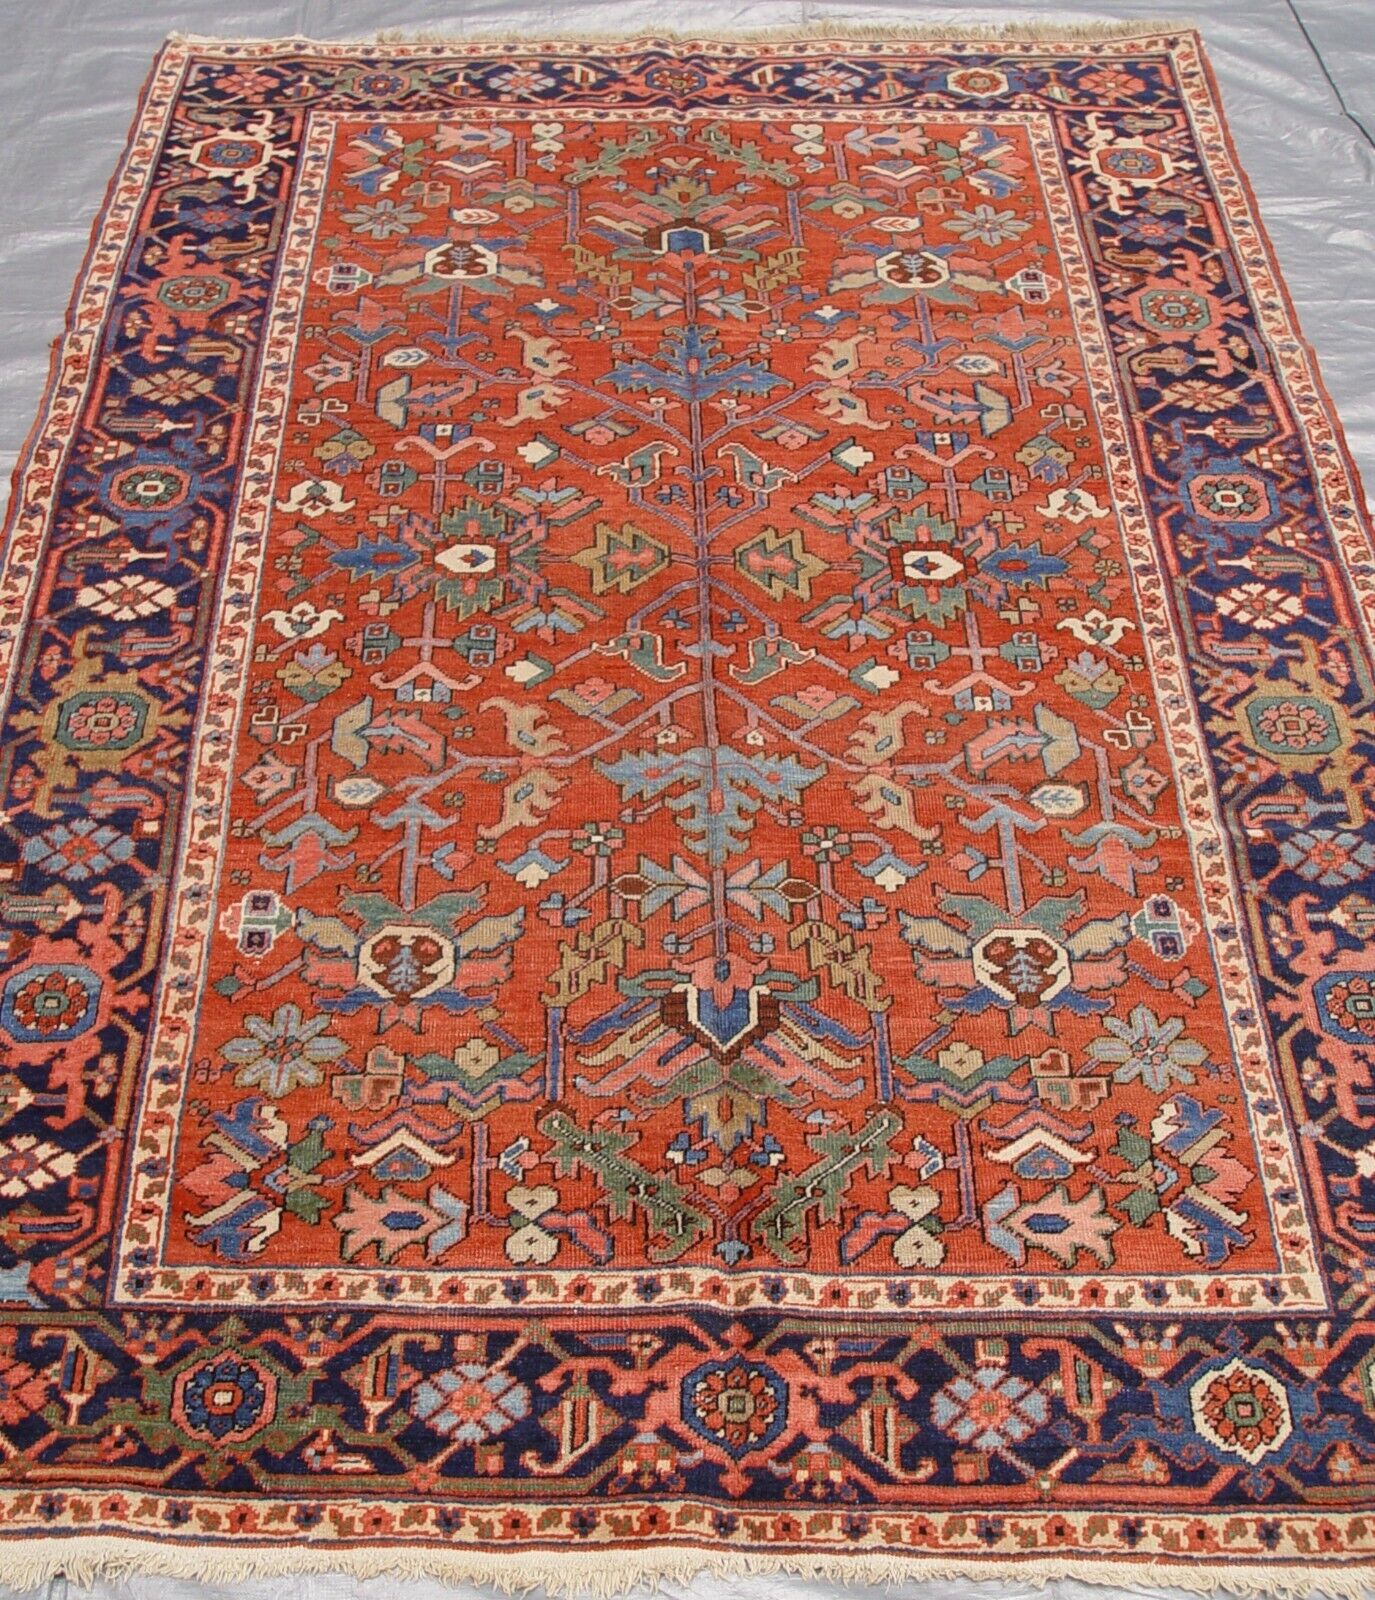 6' x 9' ANTIQUE 1900s HERIZZ SERAPII TRIBAL HAND KNOTTED WOOL ORIENTAL RUG 